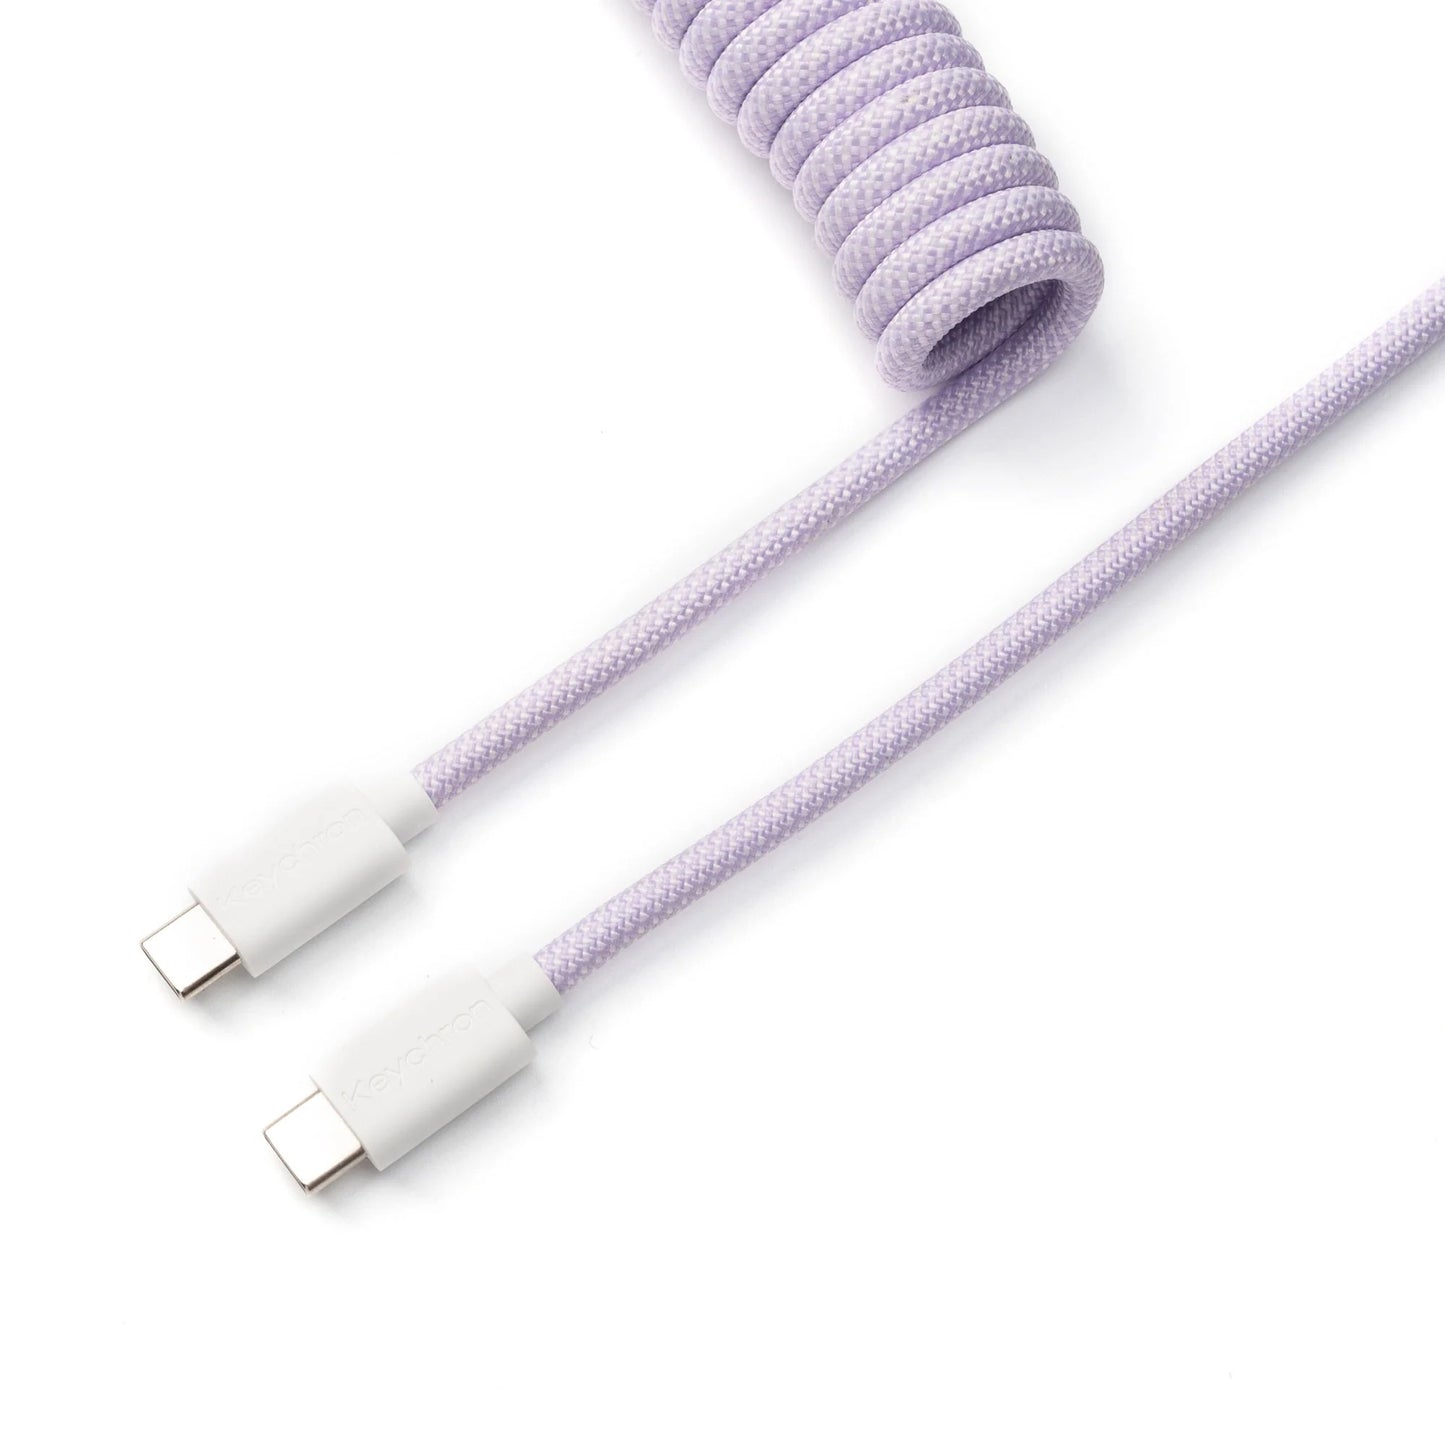 Coiled Type-C Cable - Light Purple